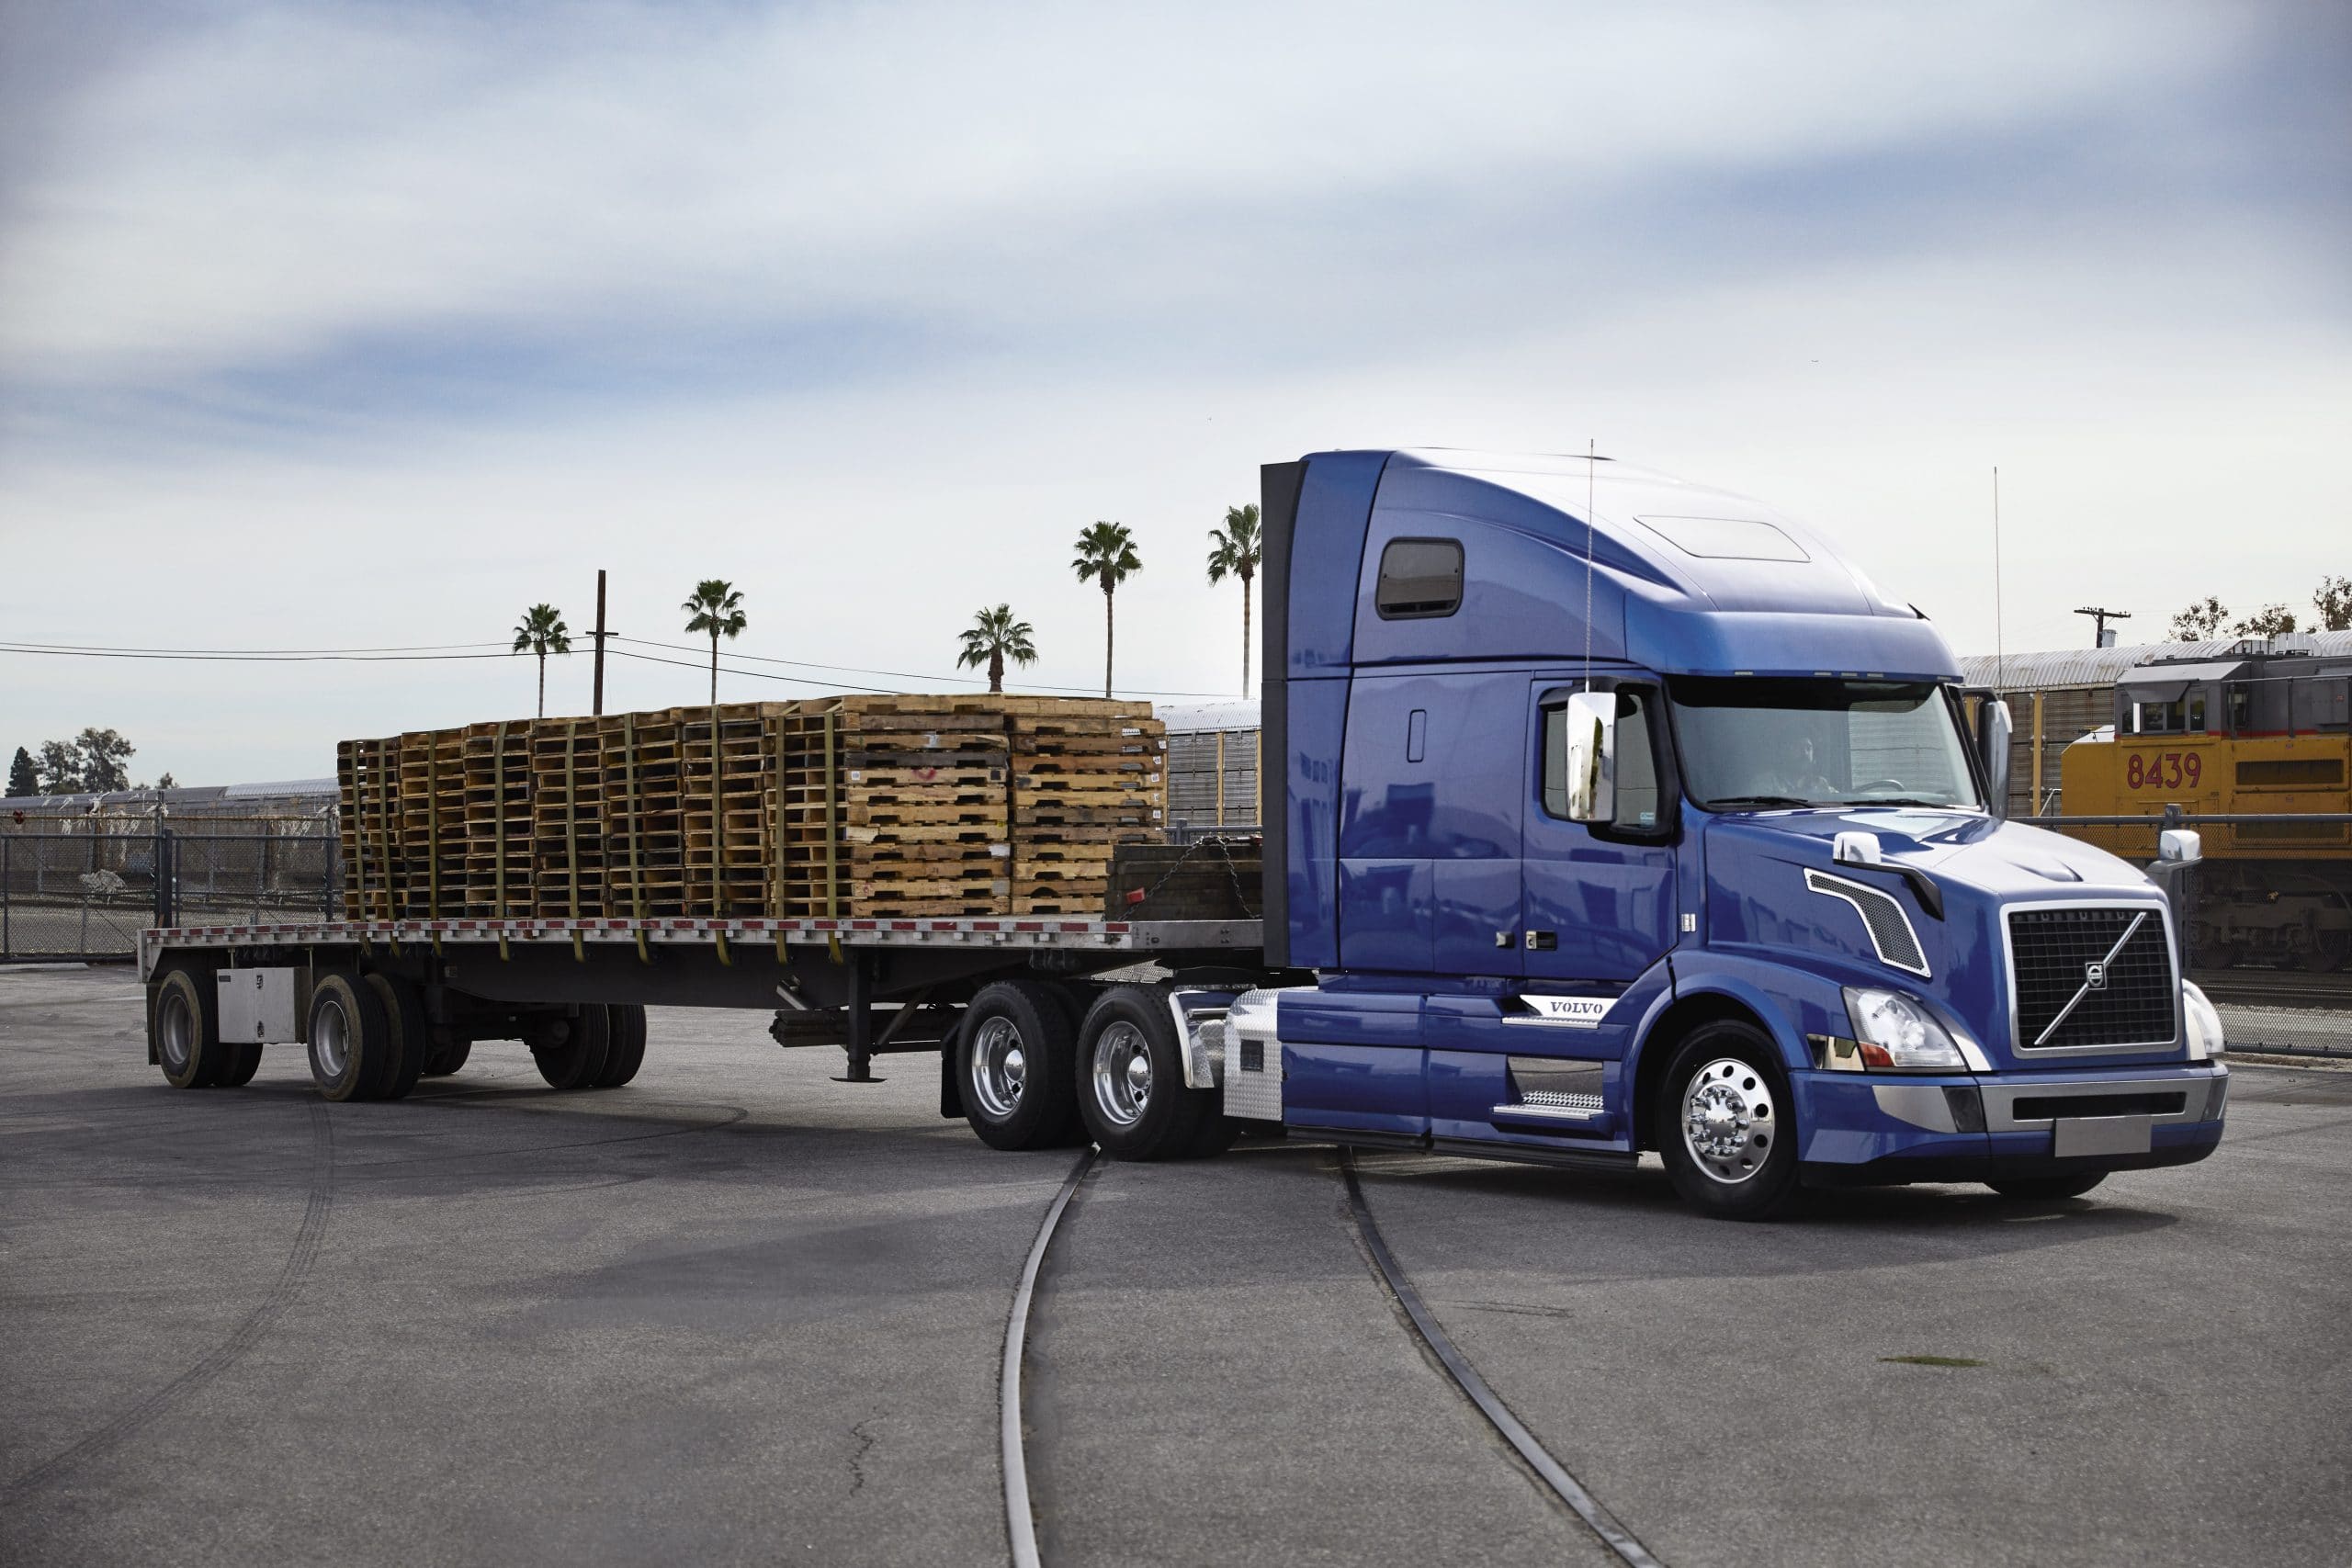 From flatbed to reefer—the 4 equipment types you can run with Uber Freight